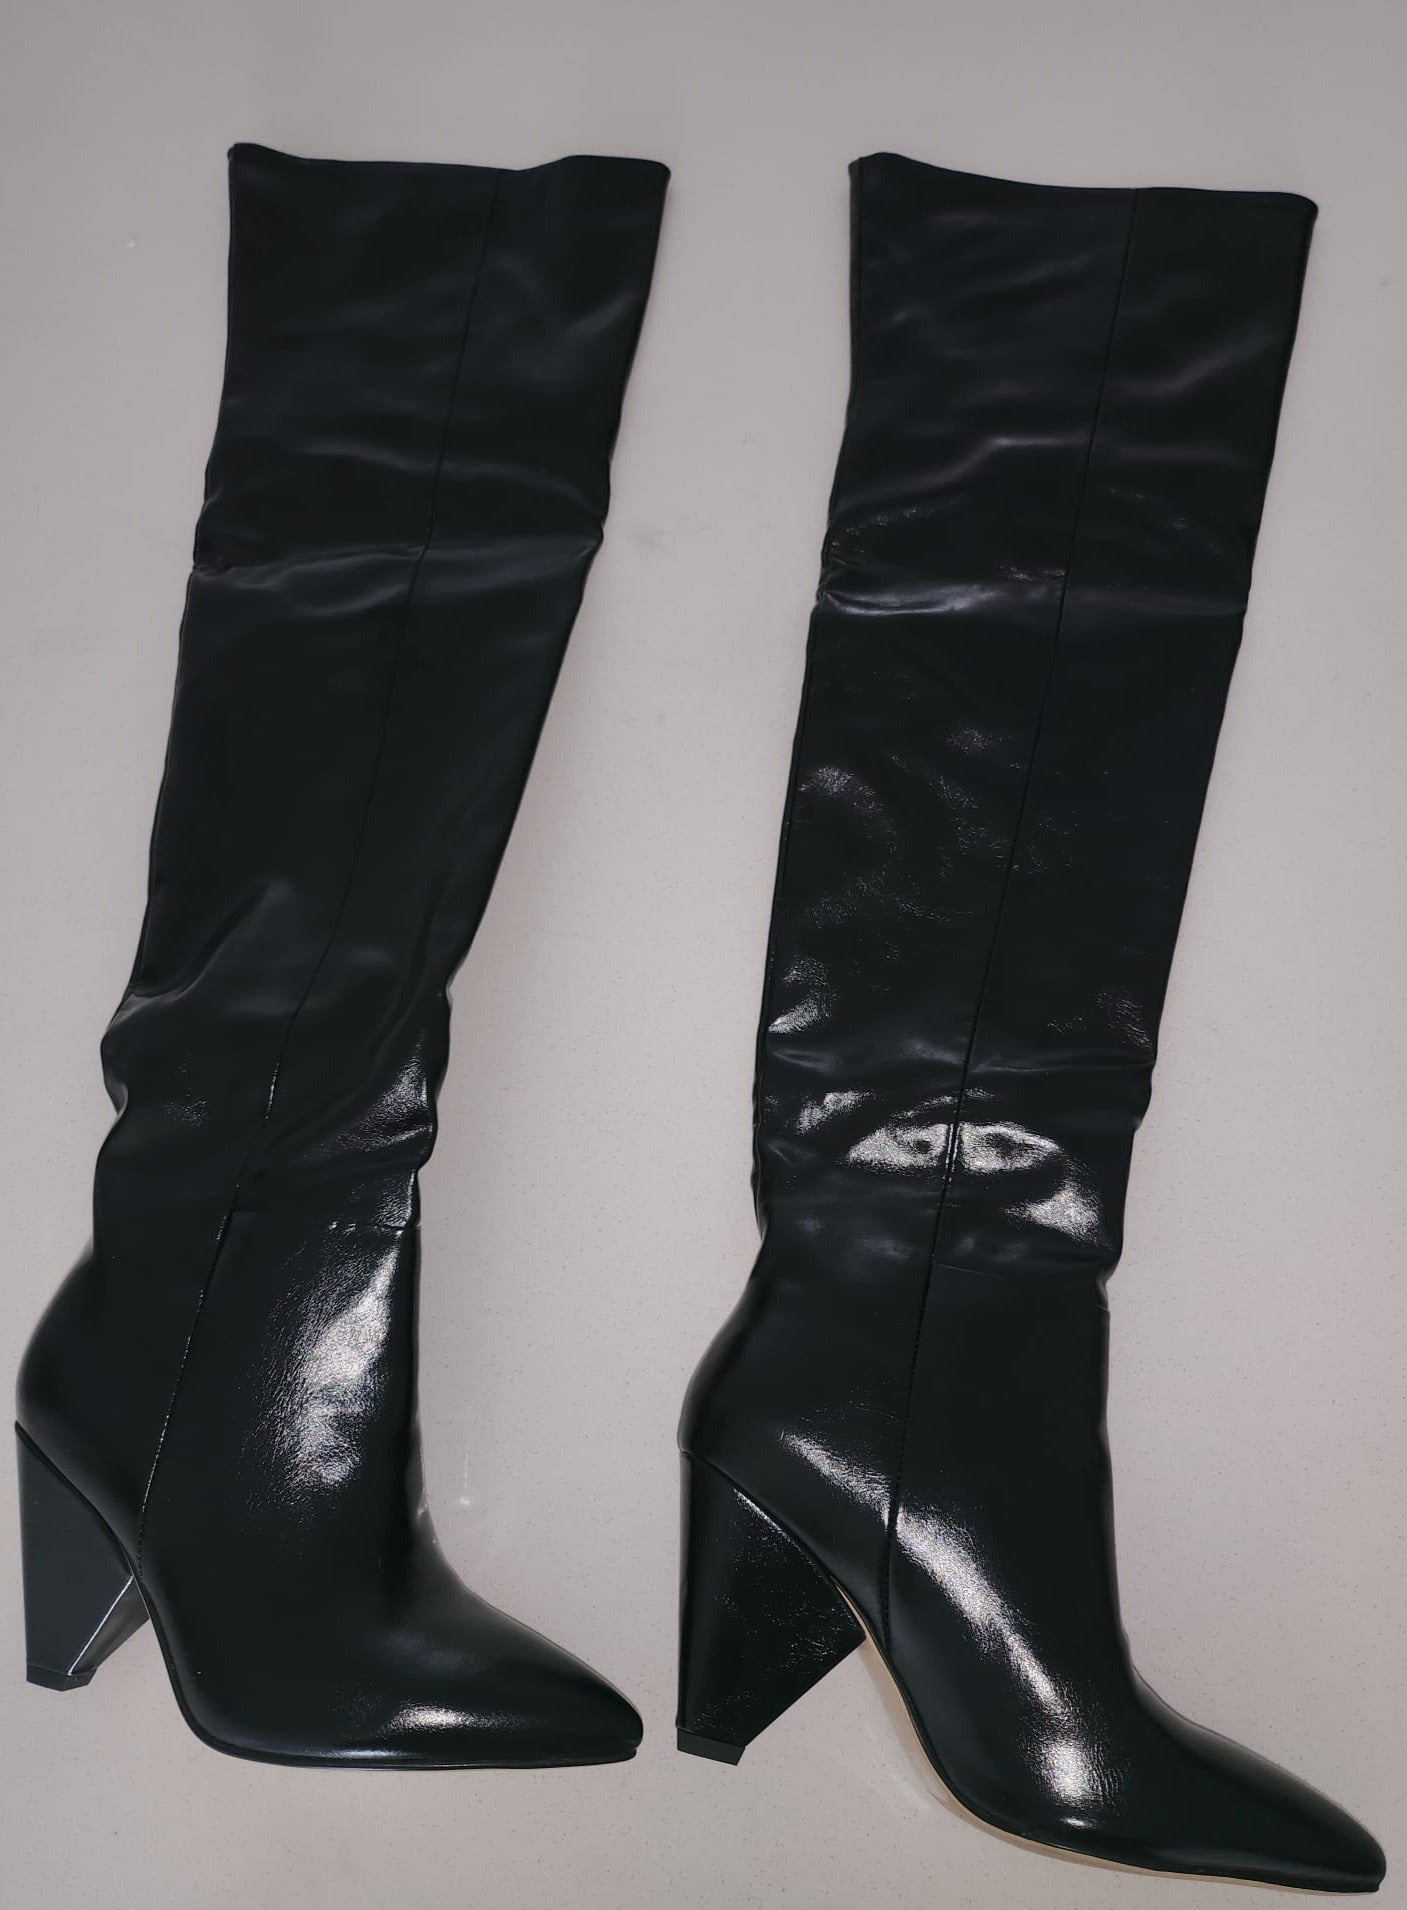 Clearance -"Cheope" Inspired Knee Long Boots